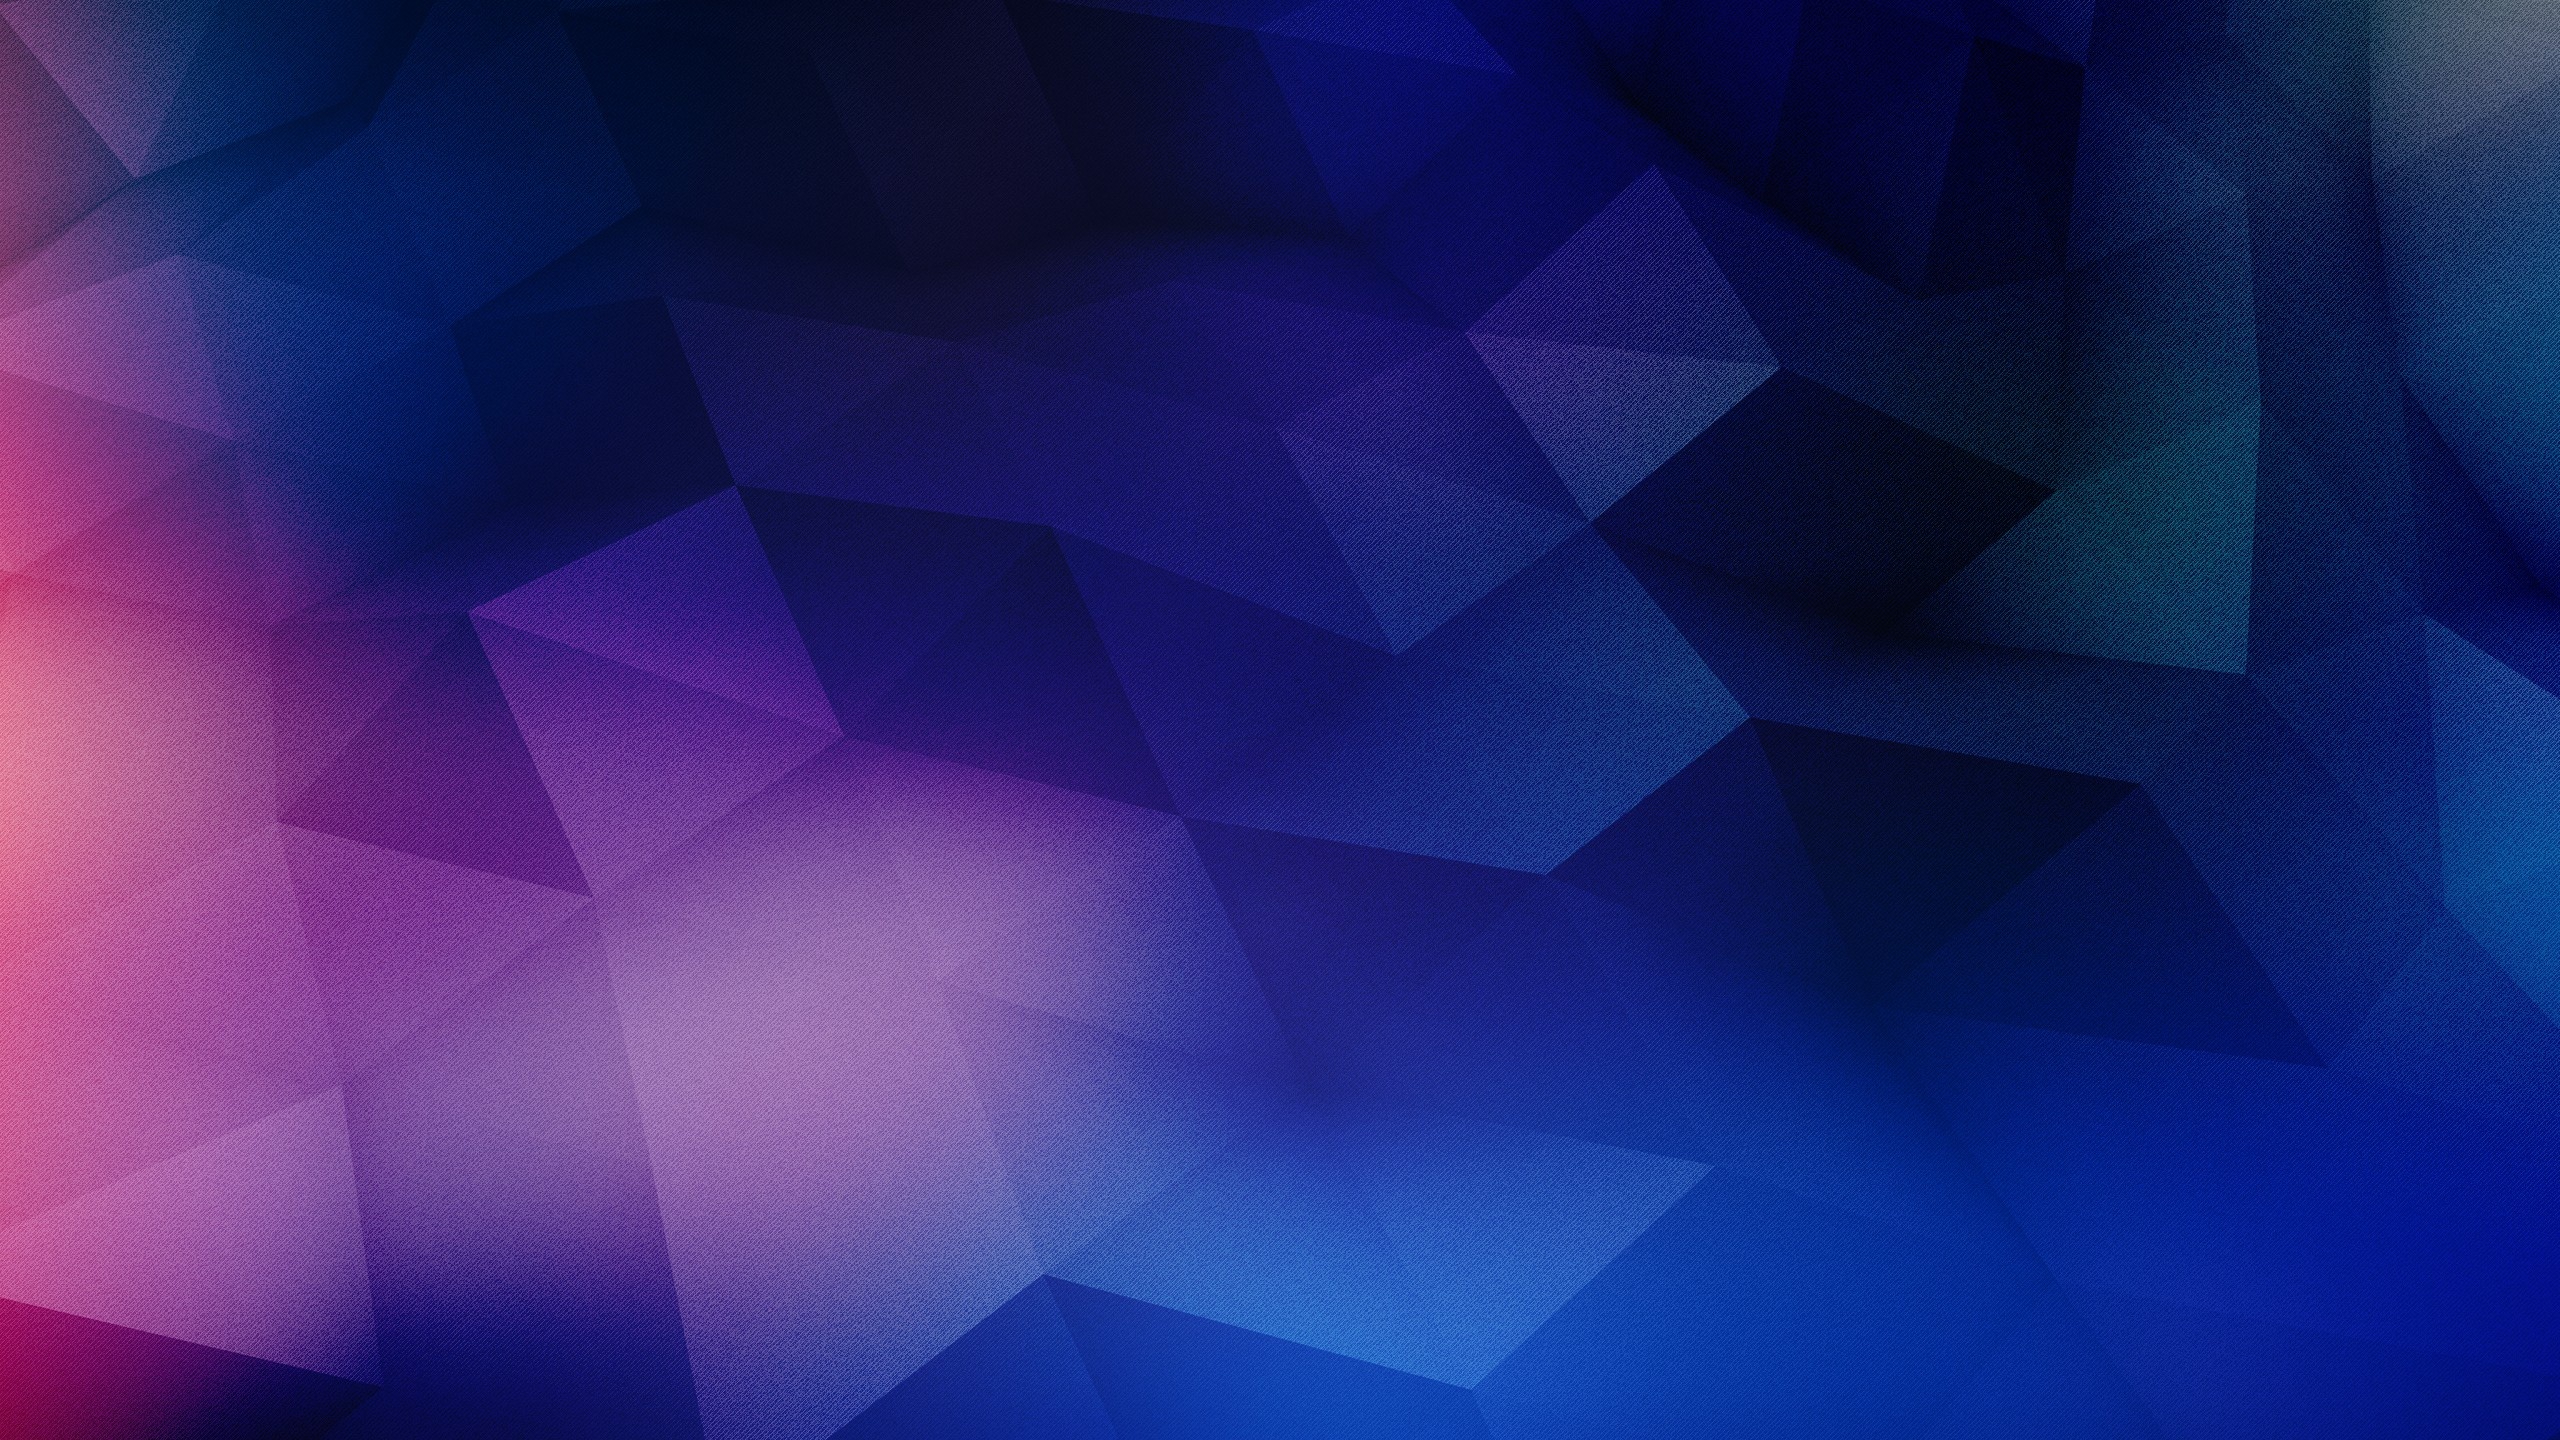 MKBHD desktop wallpaper, Abstract shapes, Colorful backgrounds, 2560x1440 HD Desktop